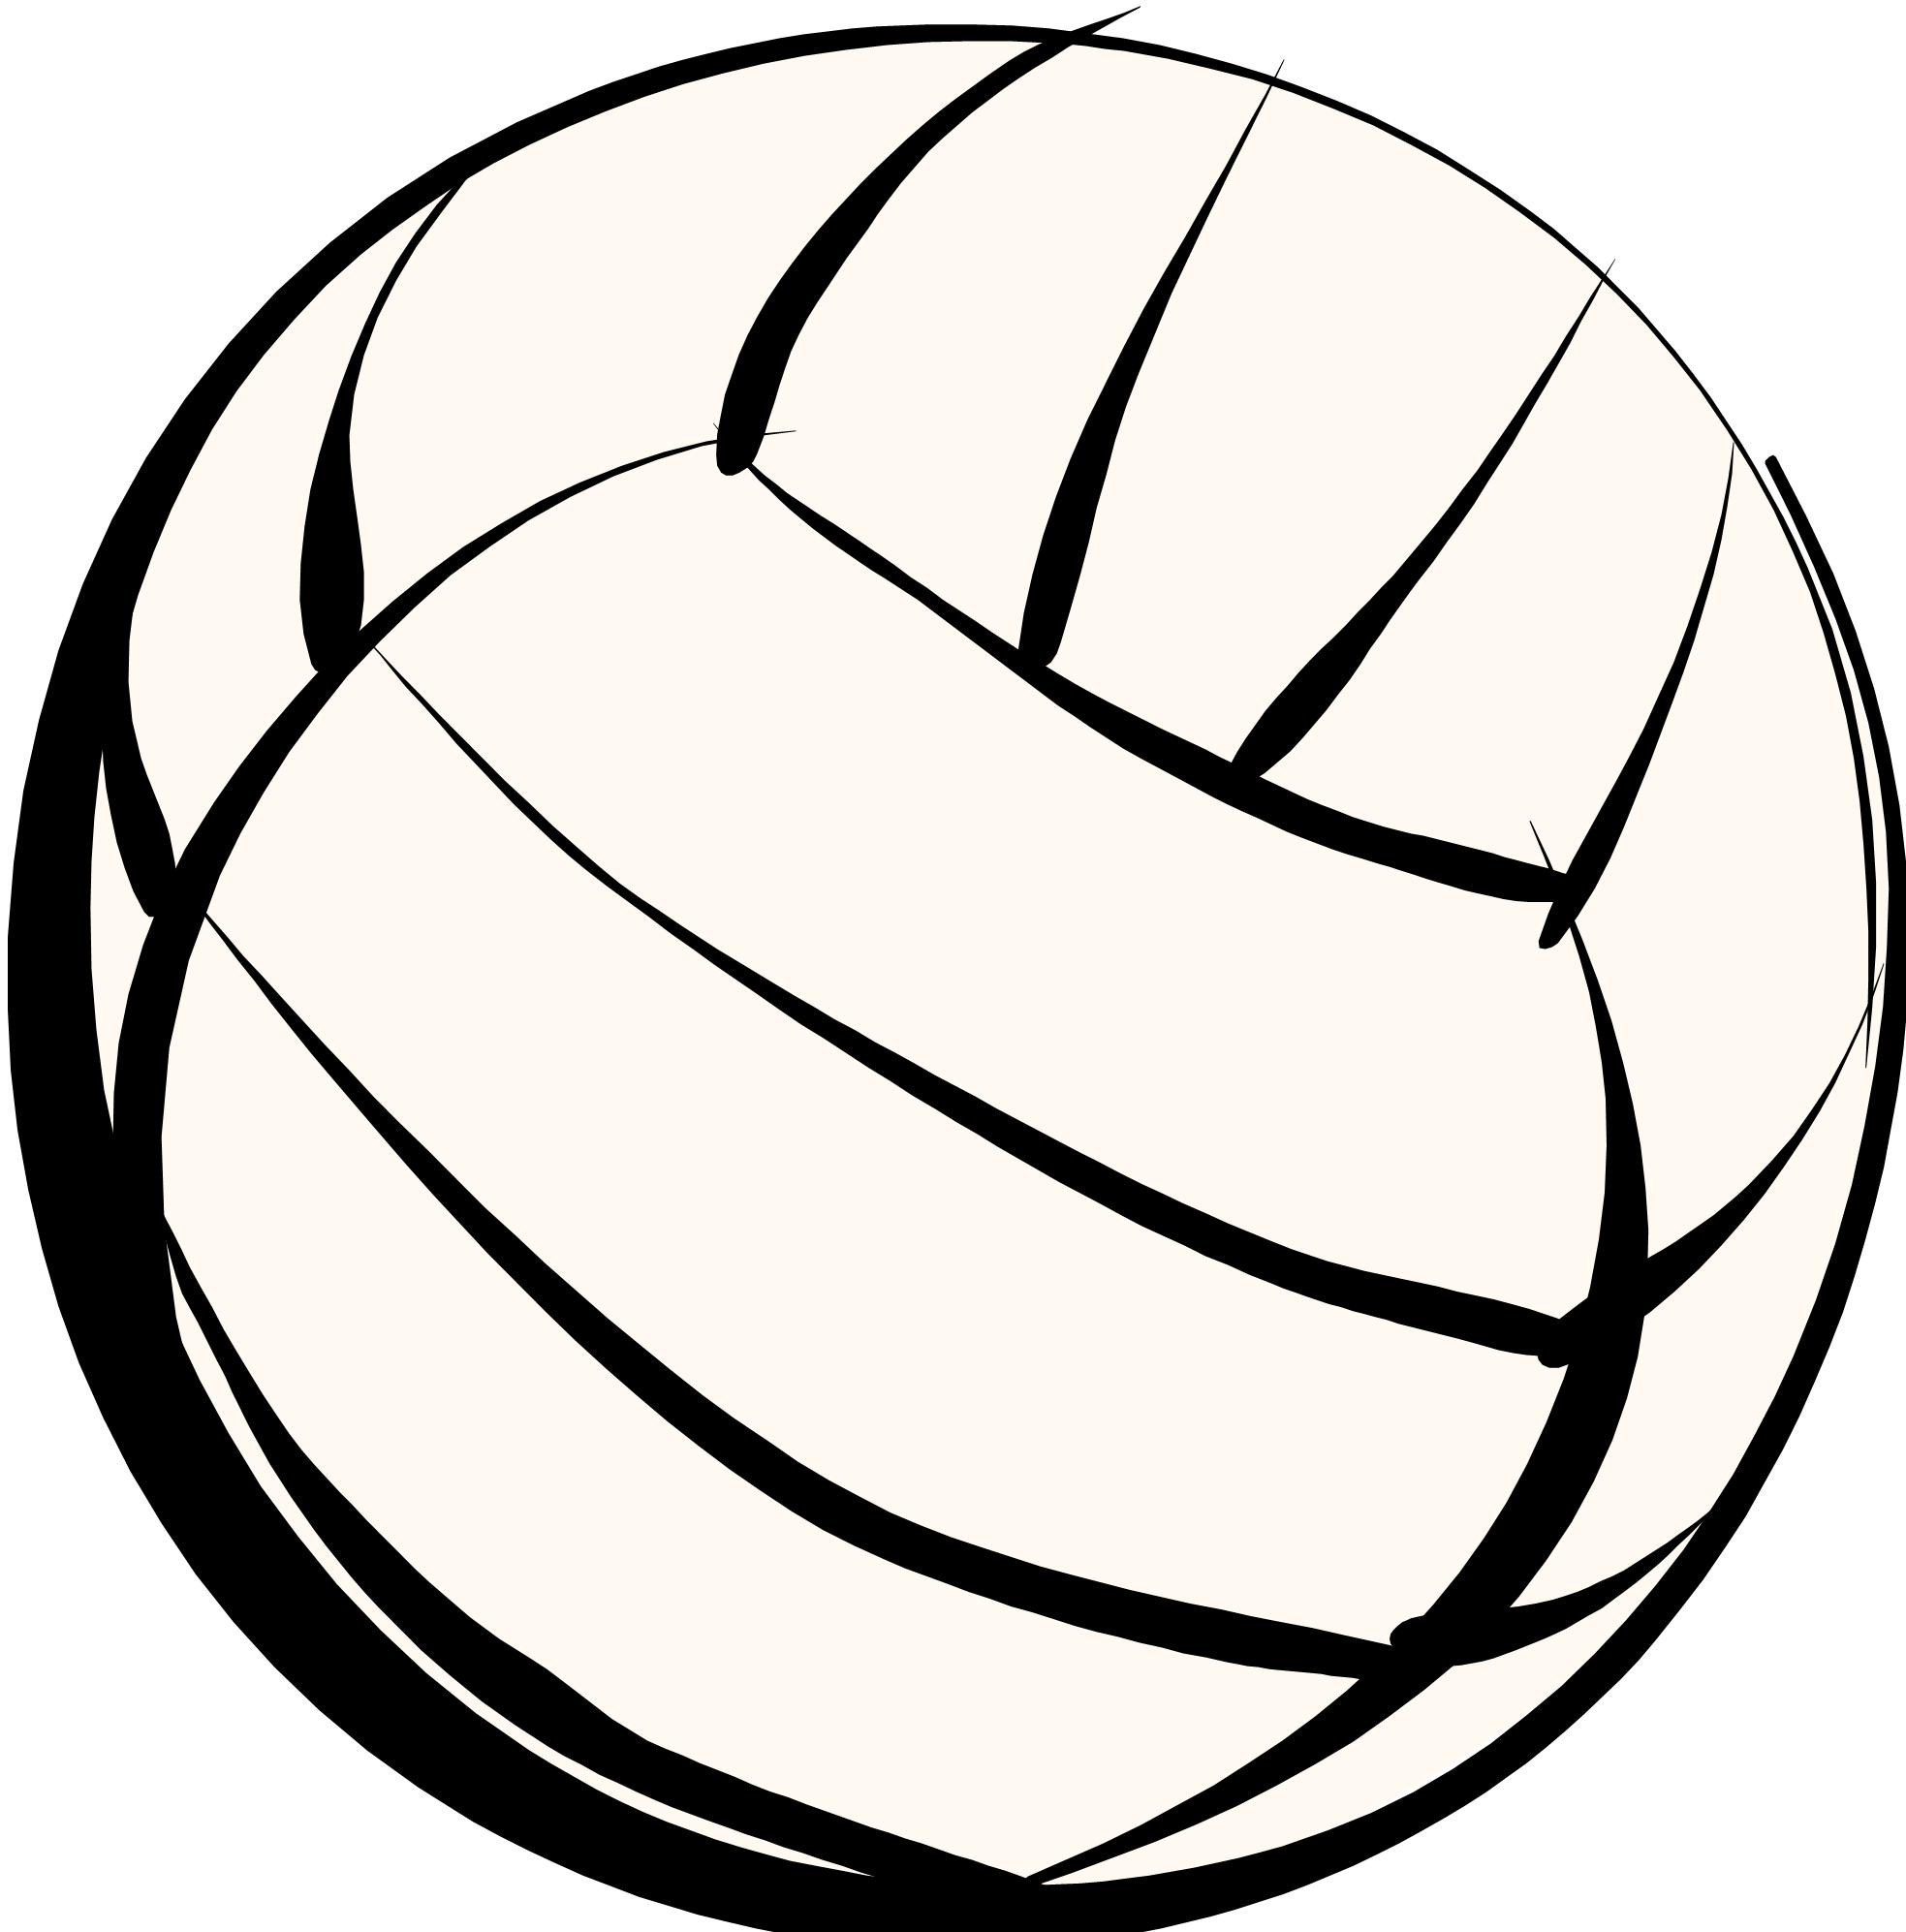 Volleyball image - vector clip art online, royalty free & public ...